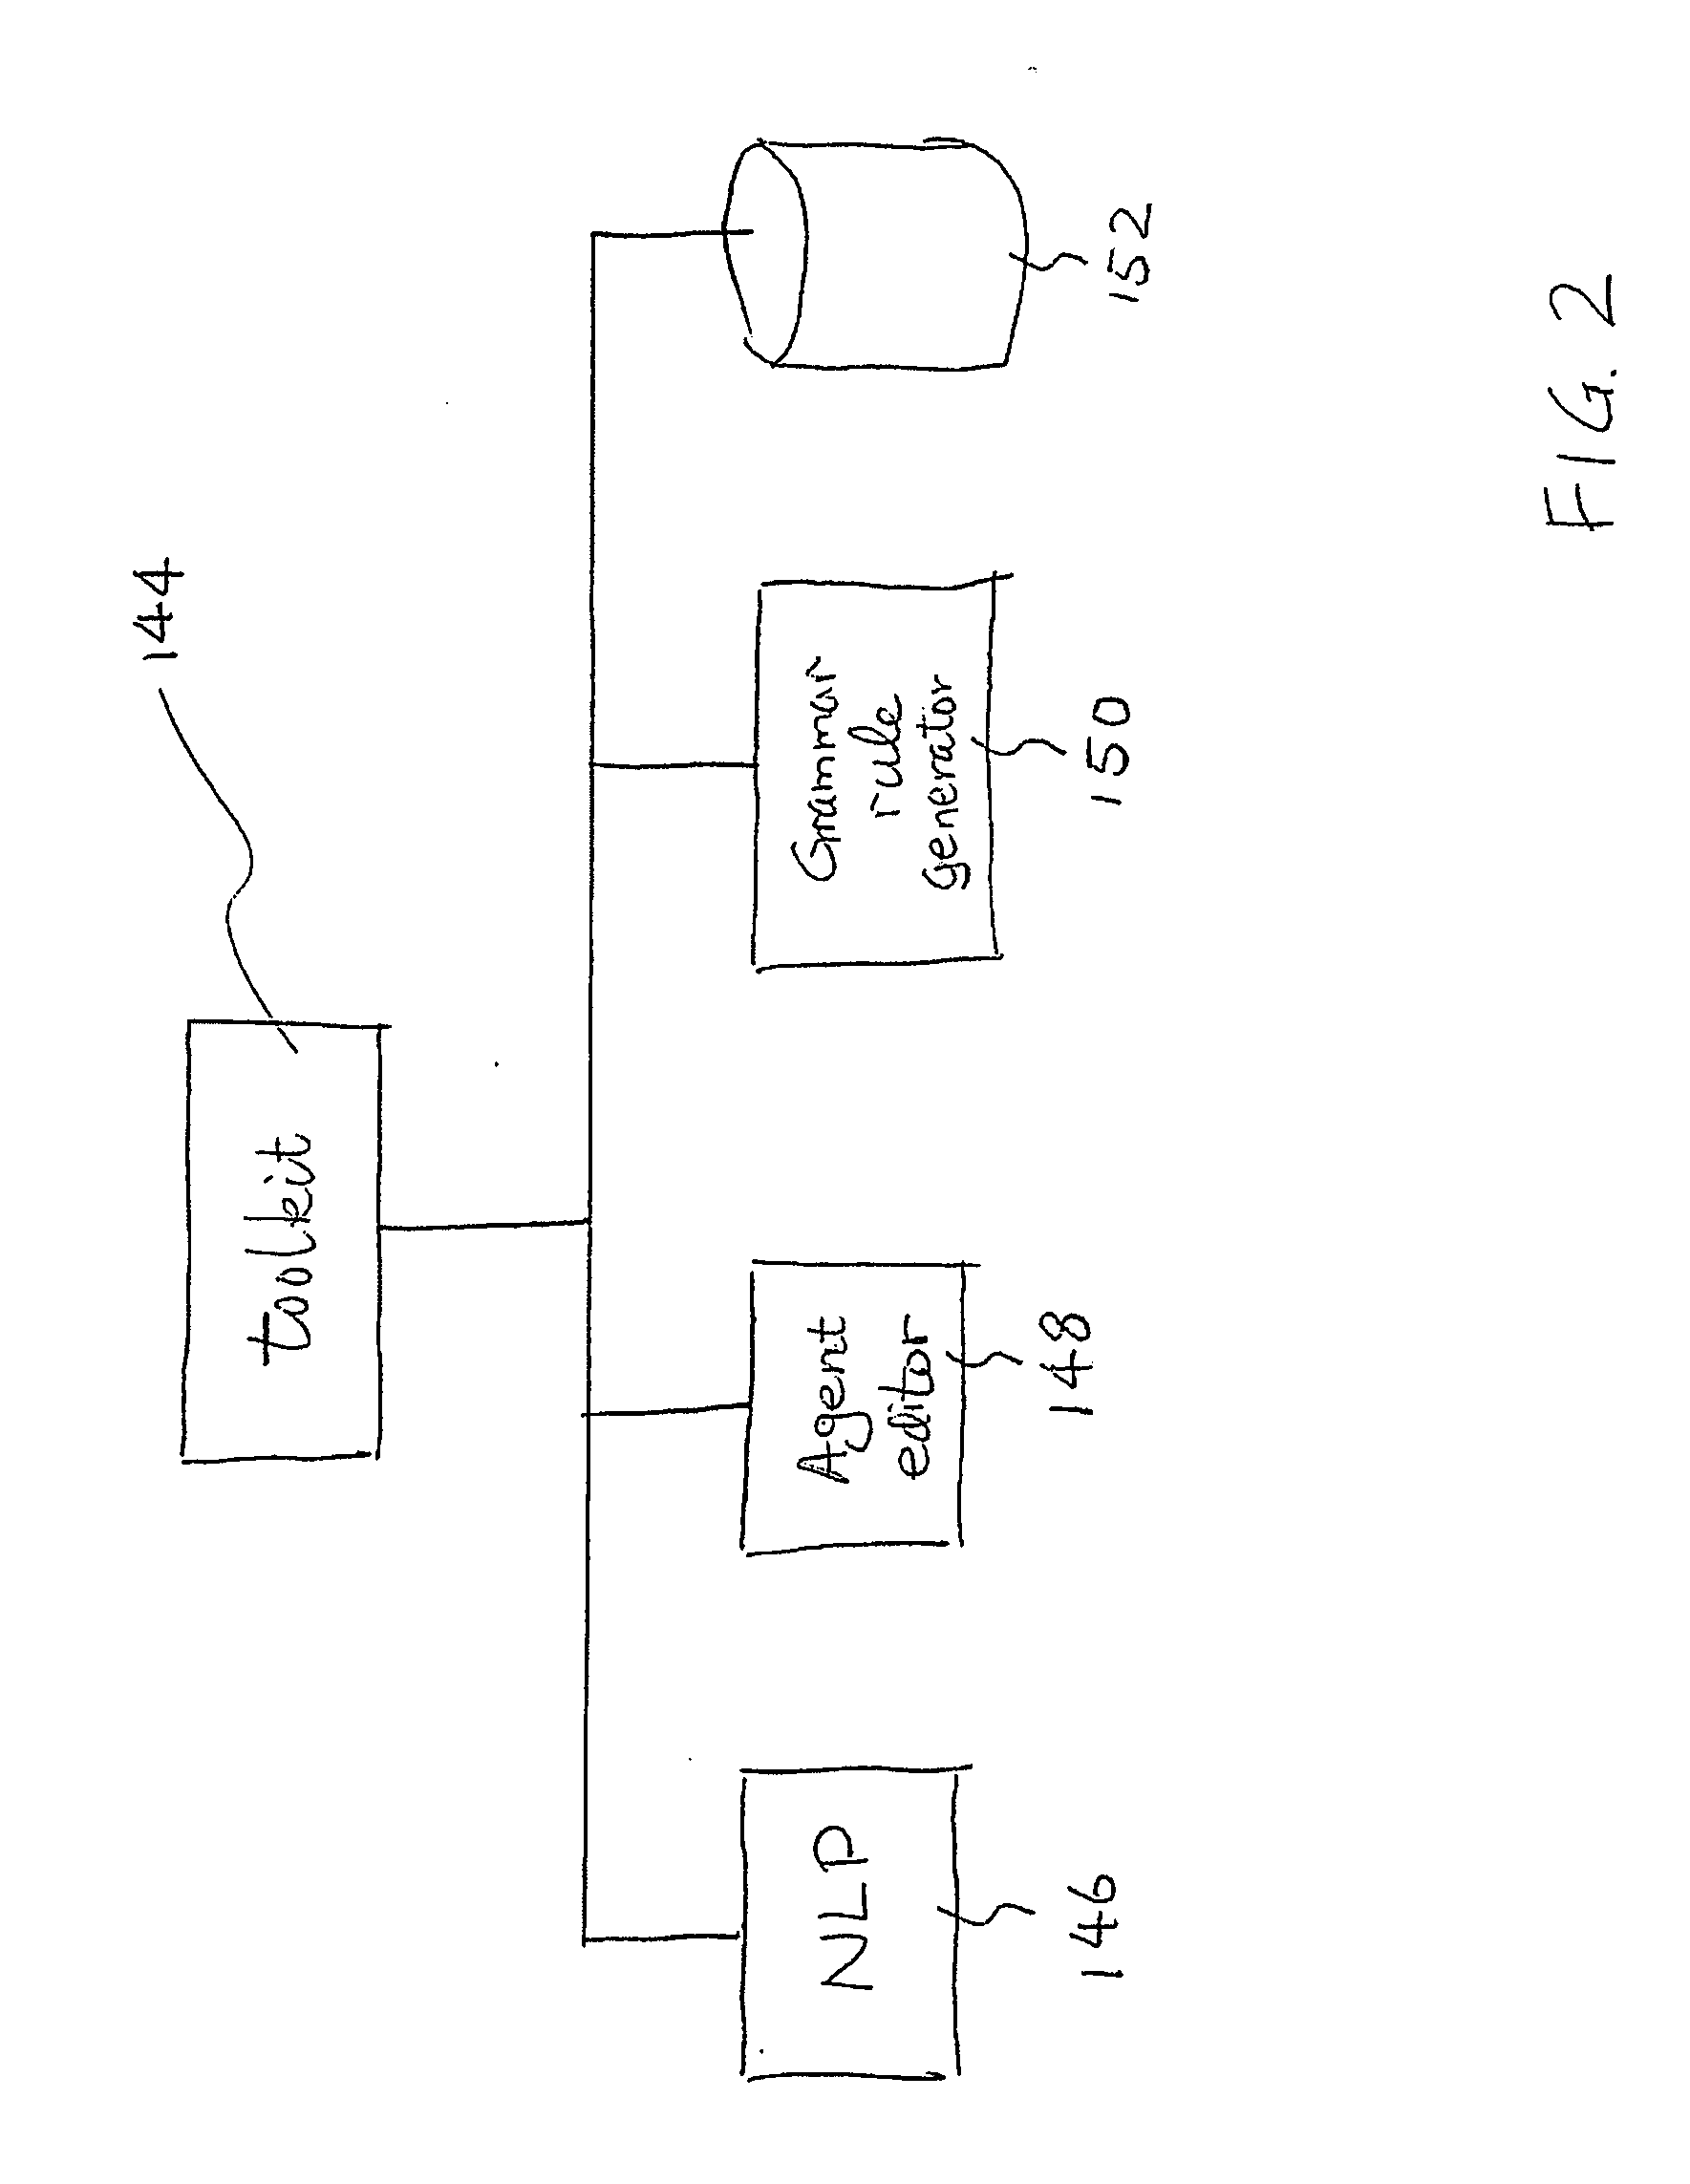 System and methods for improving accuracy of speech recognition